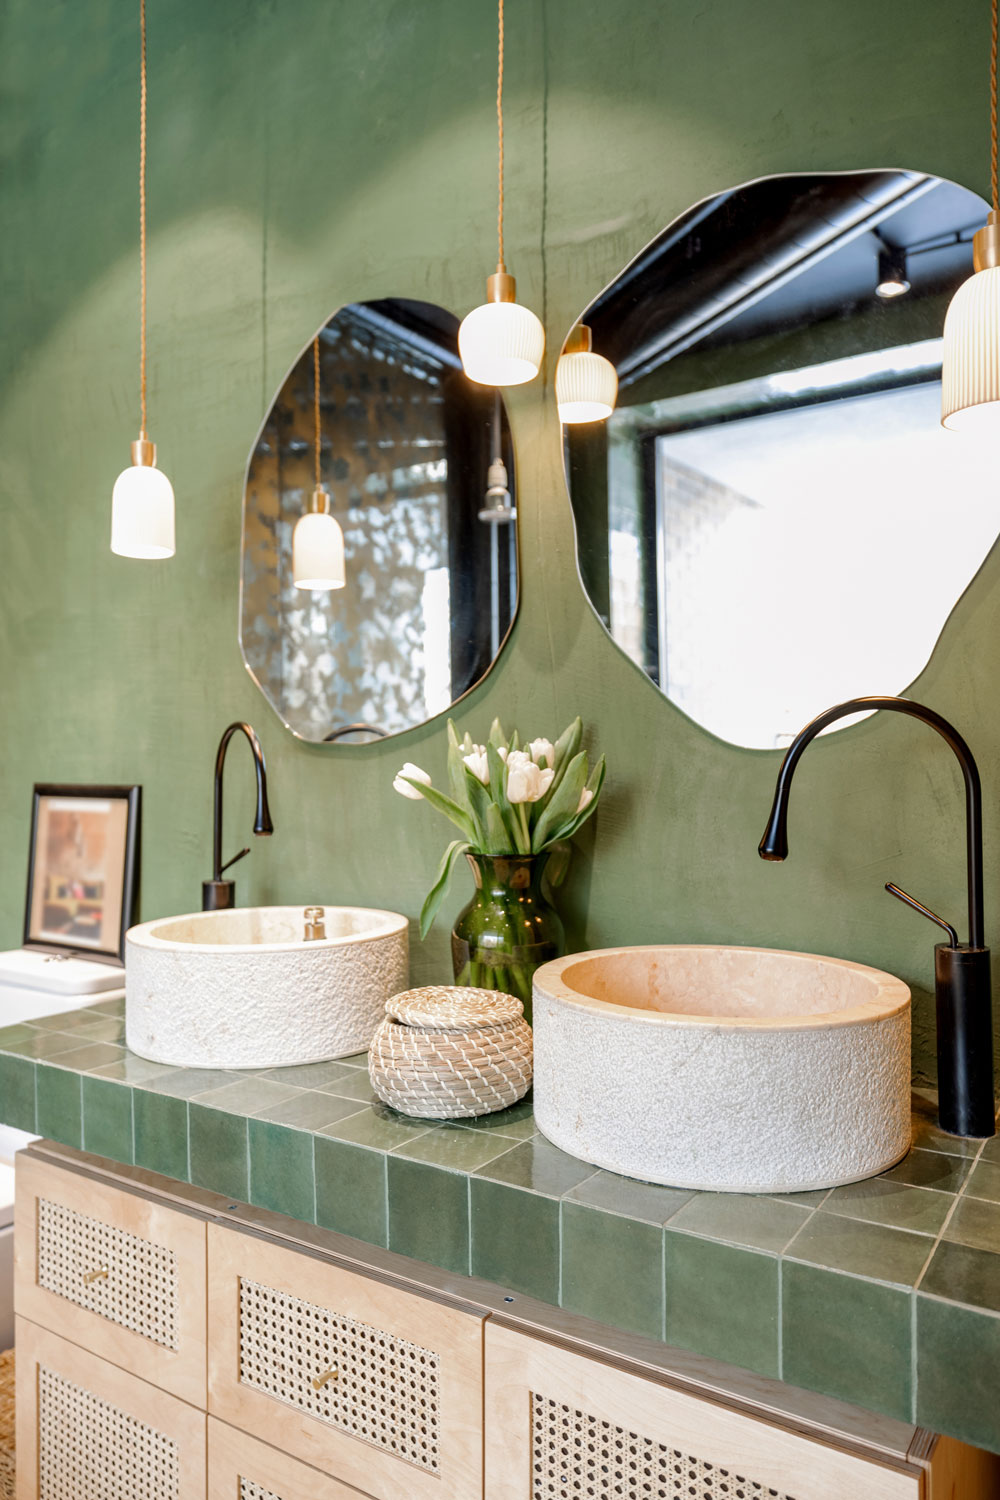 Matte green painted bathroom walls with dangling lamps and a green tiled vanity with irregular shaped mirrors